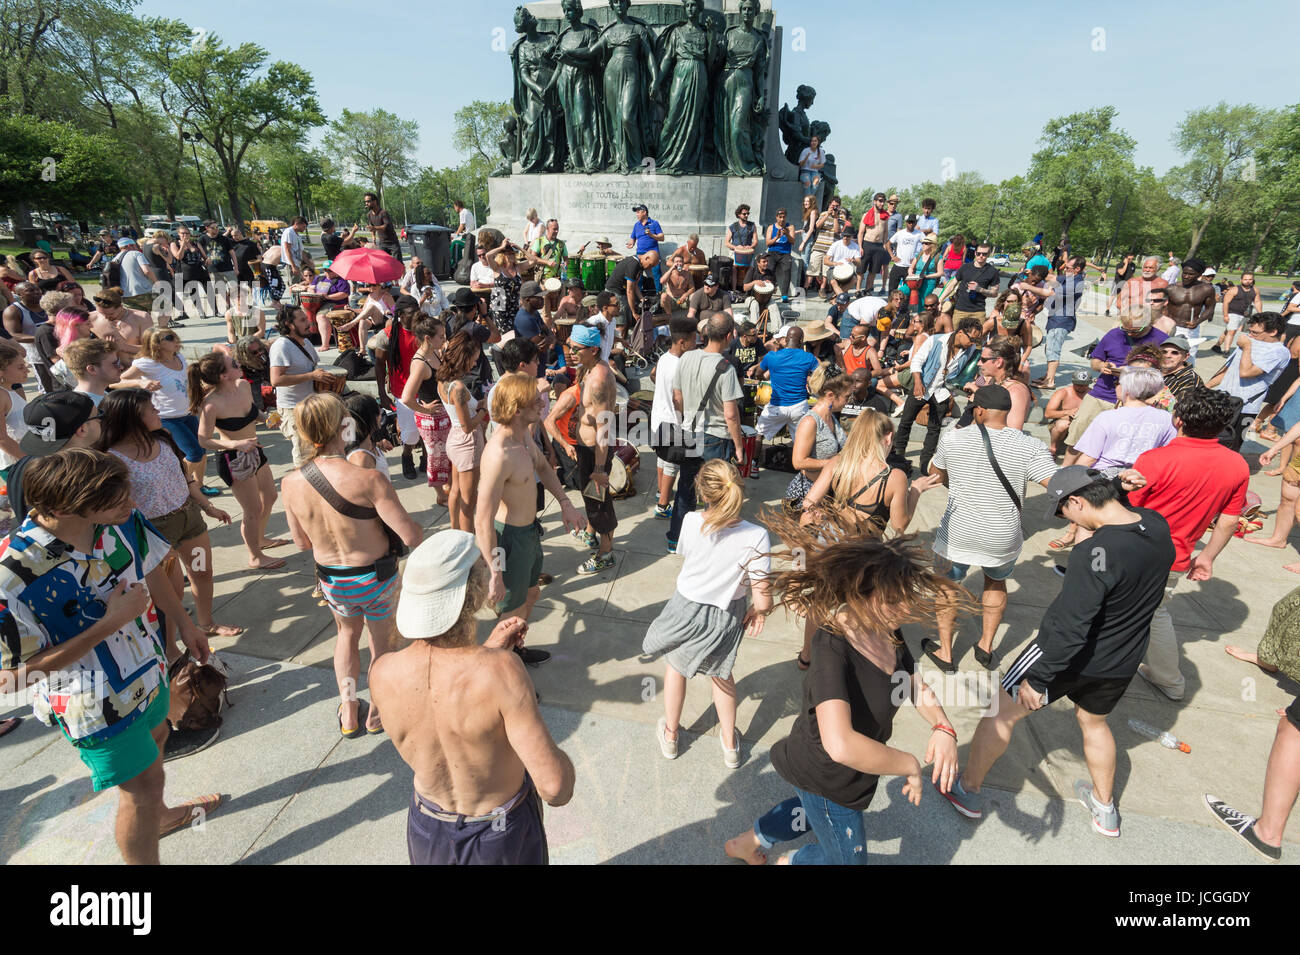 Montreal Tam-Tams Drumming Sessions take place on Sundays in Mount Royal Park (June 2017) Stock Photo